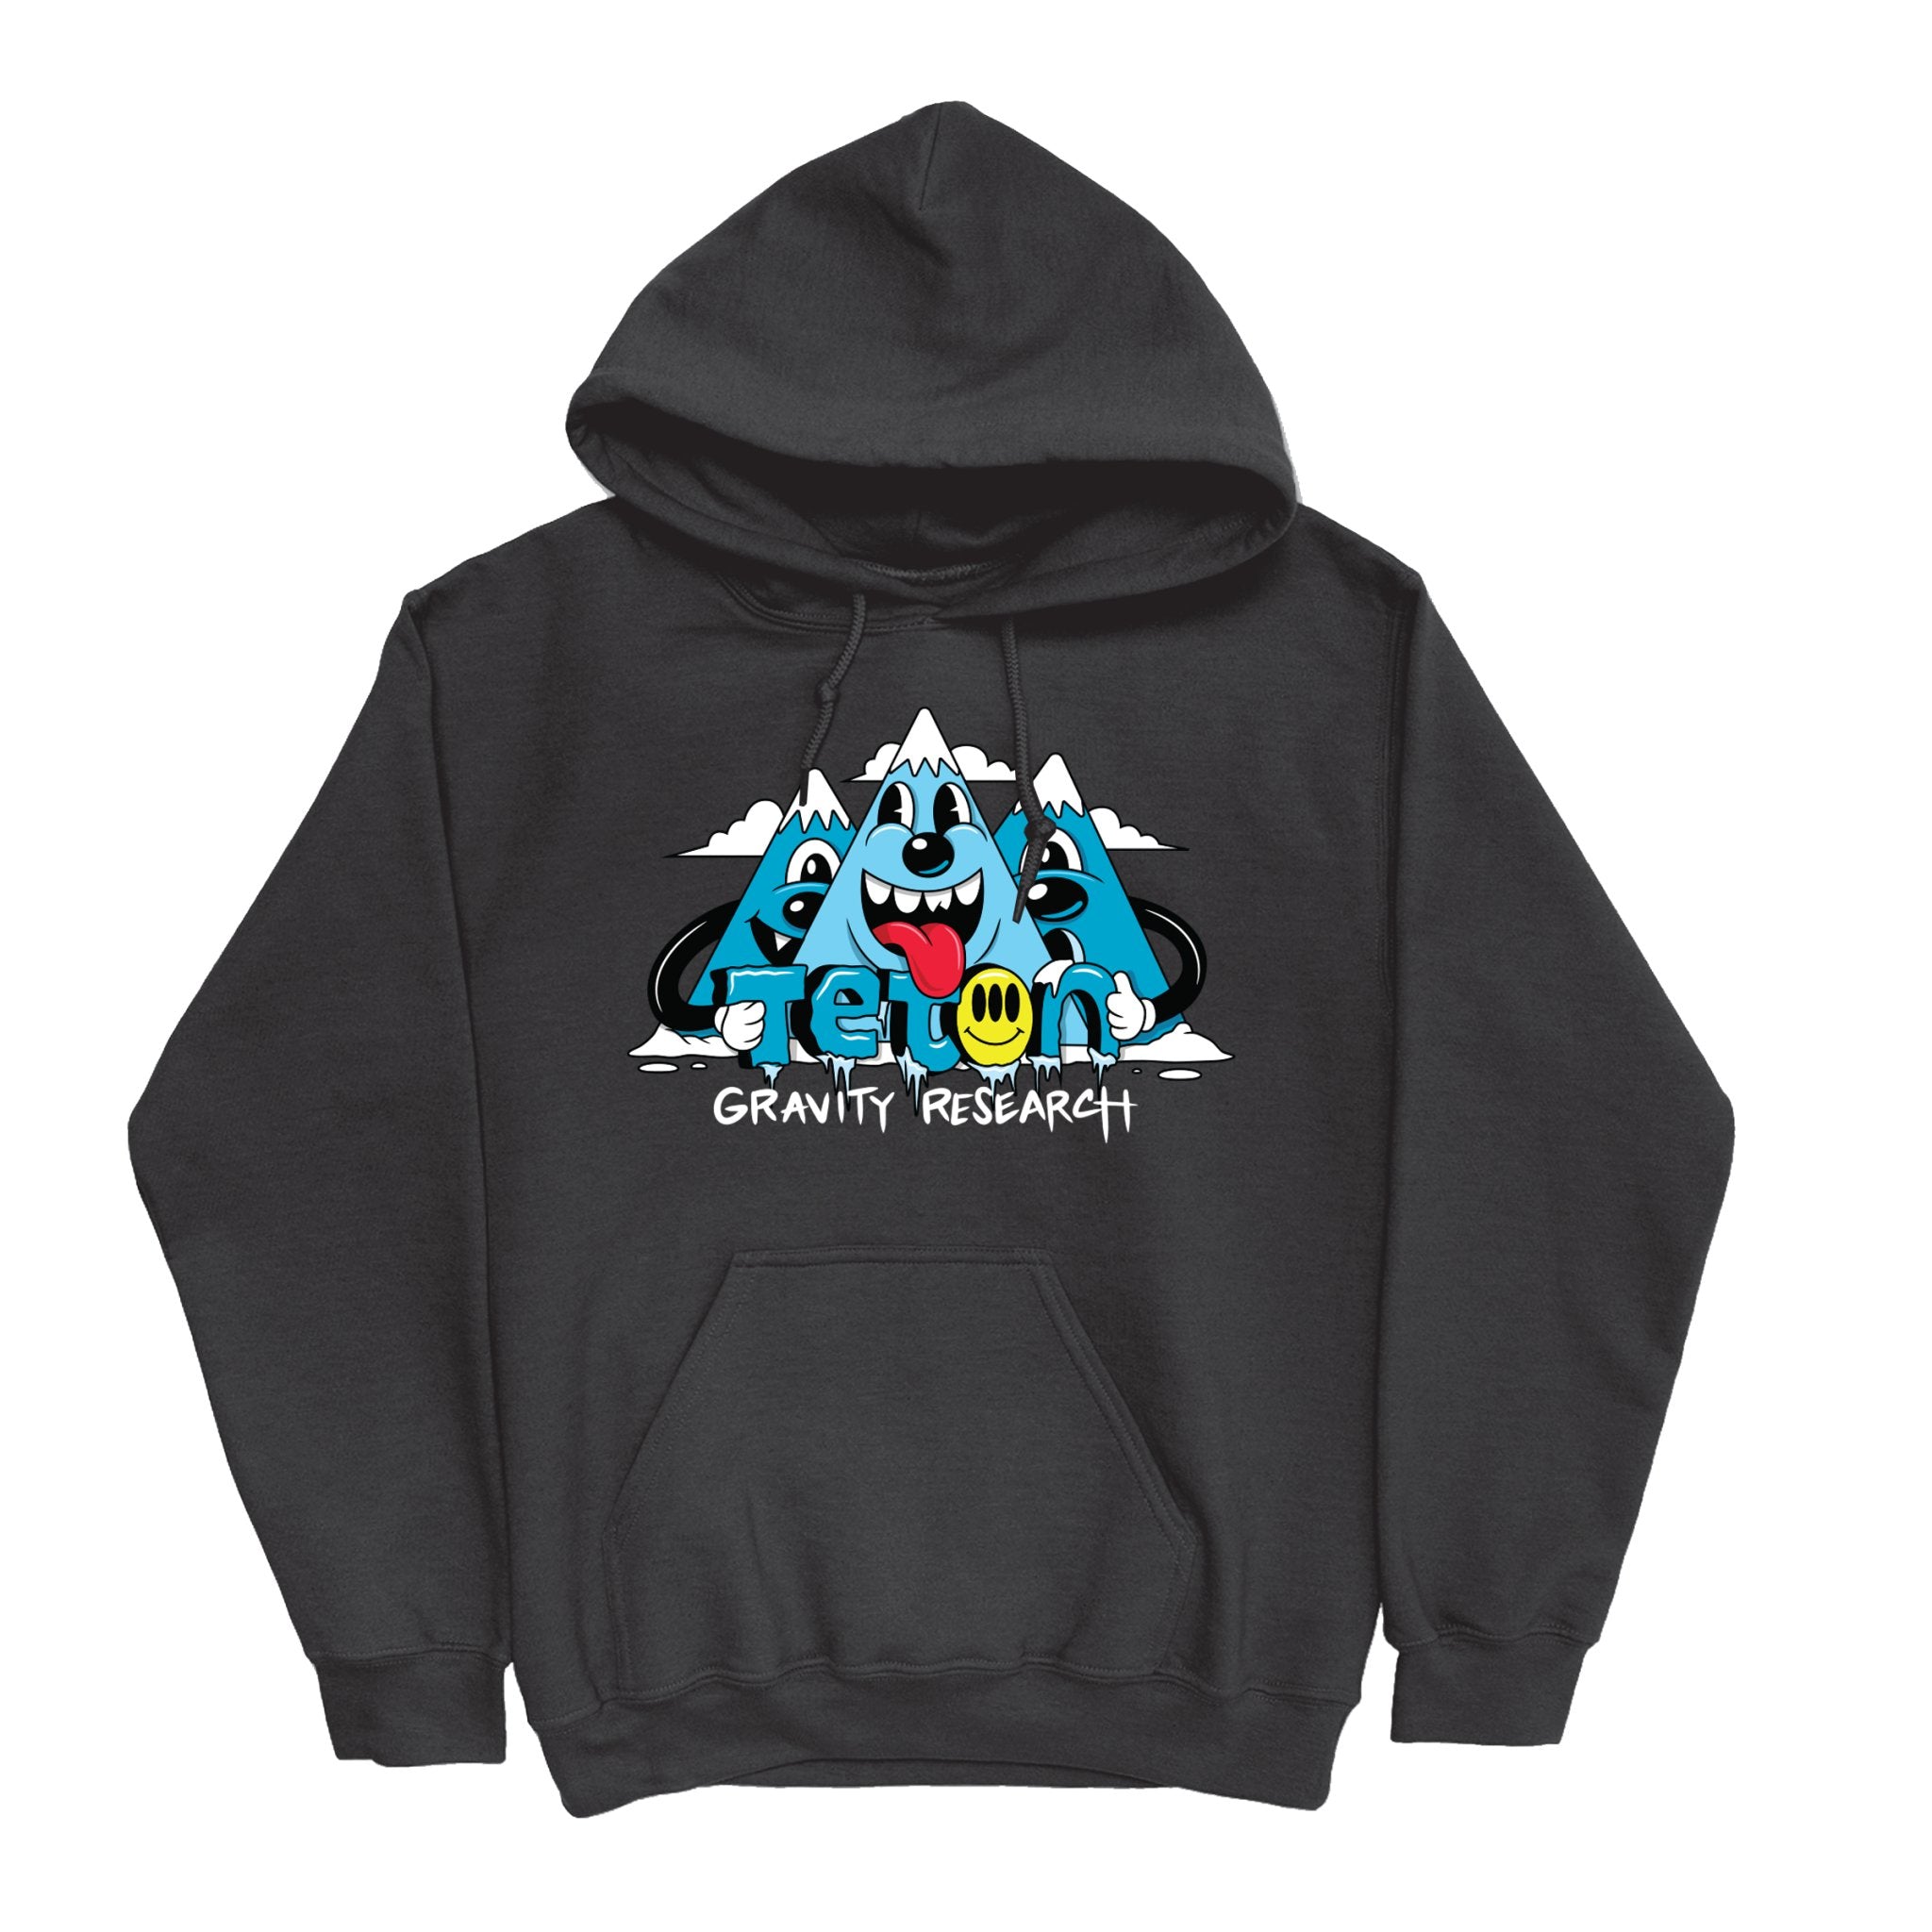 GREG MIKE x TGR "HIGHSPEED" Hoodie with a Greg Mike design on the chest of three mountains with cartoon faces on them.